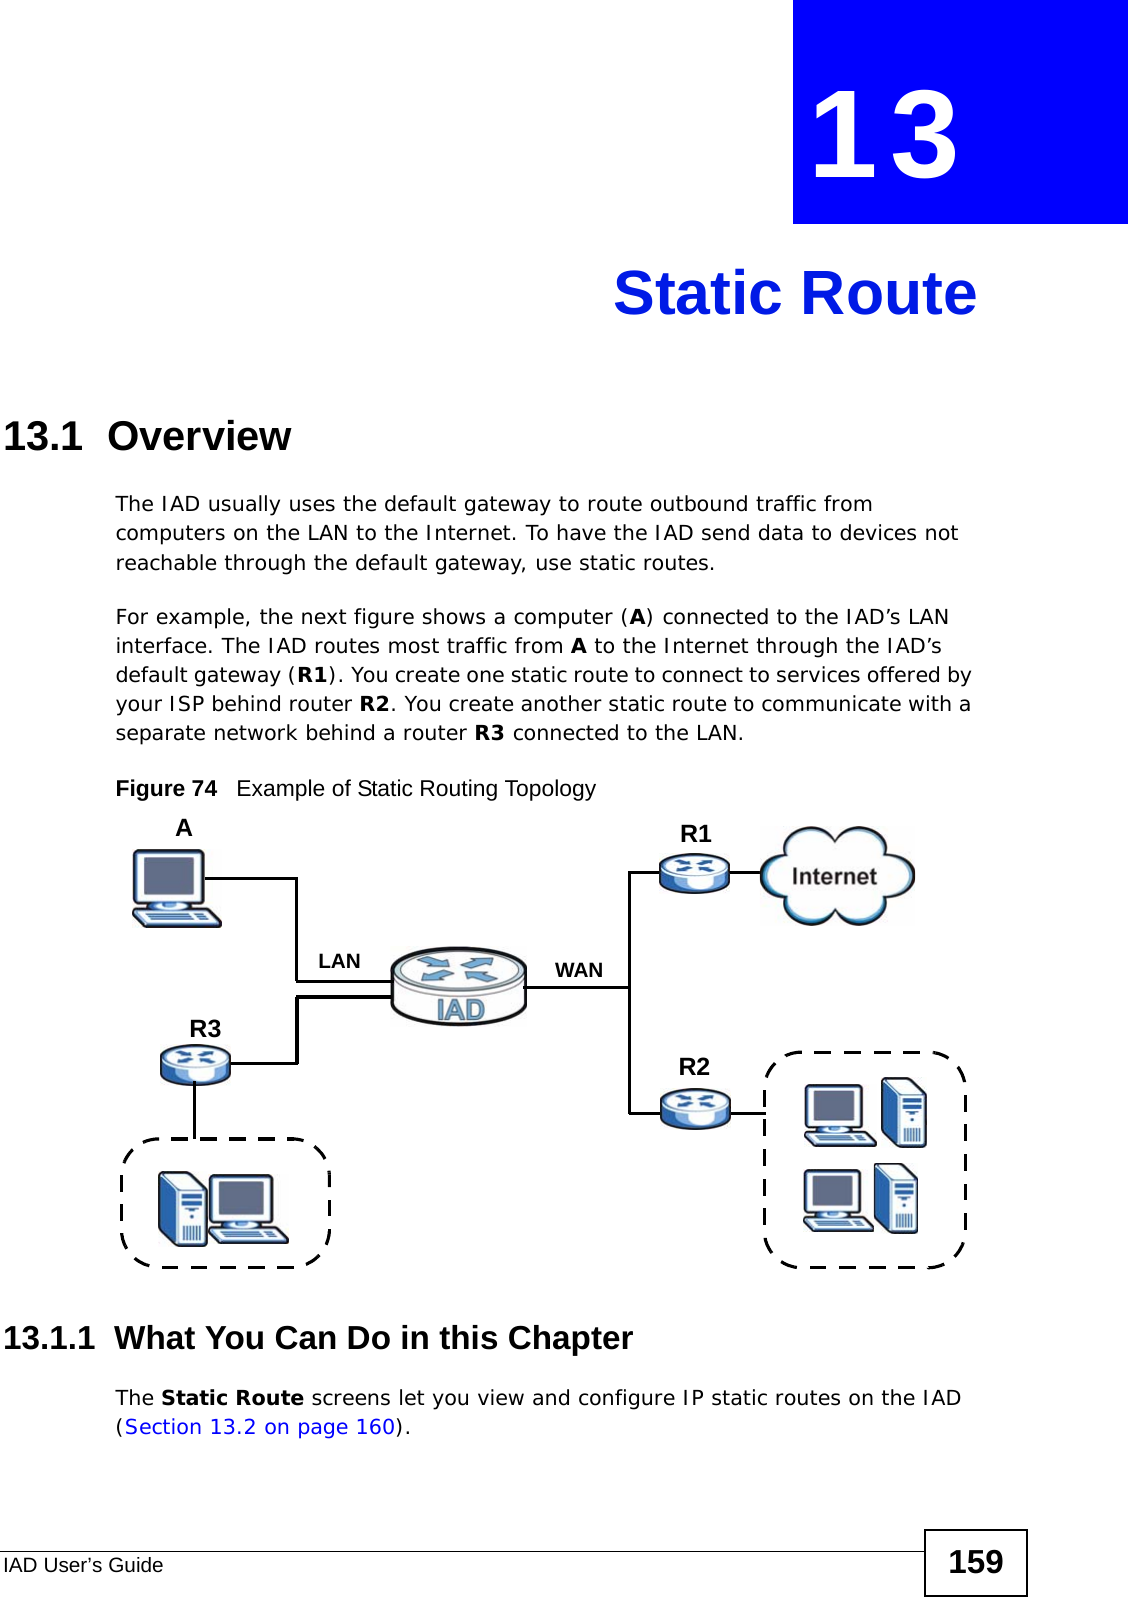 IAD User’s Guide 159CHAPTER  13 Static Route13.1  Overview   The IAD usually uses the default gateway to route outbound traffic from computers on the LAN to the Internet. To have the IAD send data to devices not reachable through the default gateway, use static routes.For example, the next figure shows a computer (A) connected to the IAD’s LAN interface. The IAD routes most traffic from A to the Internet through the IAD’s default gateway (R1). You create one static route to connect to services offered by your ISP behind router R2. You create another static route to communicate with a separate network behind a router R3 connected to the LAN. Figure 74   Example of Static Routing Topology13.1.1  What You Can Do in this ChapterThe Static Route screens let you view and configure IP static routes on the IAD (Section 13.2 on page 160).WANR1R2AR3LAN